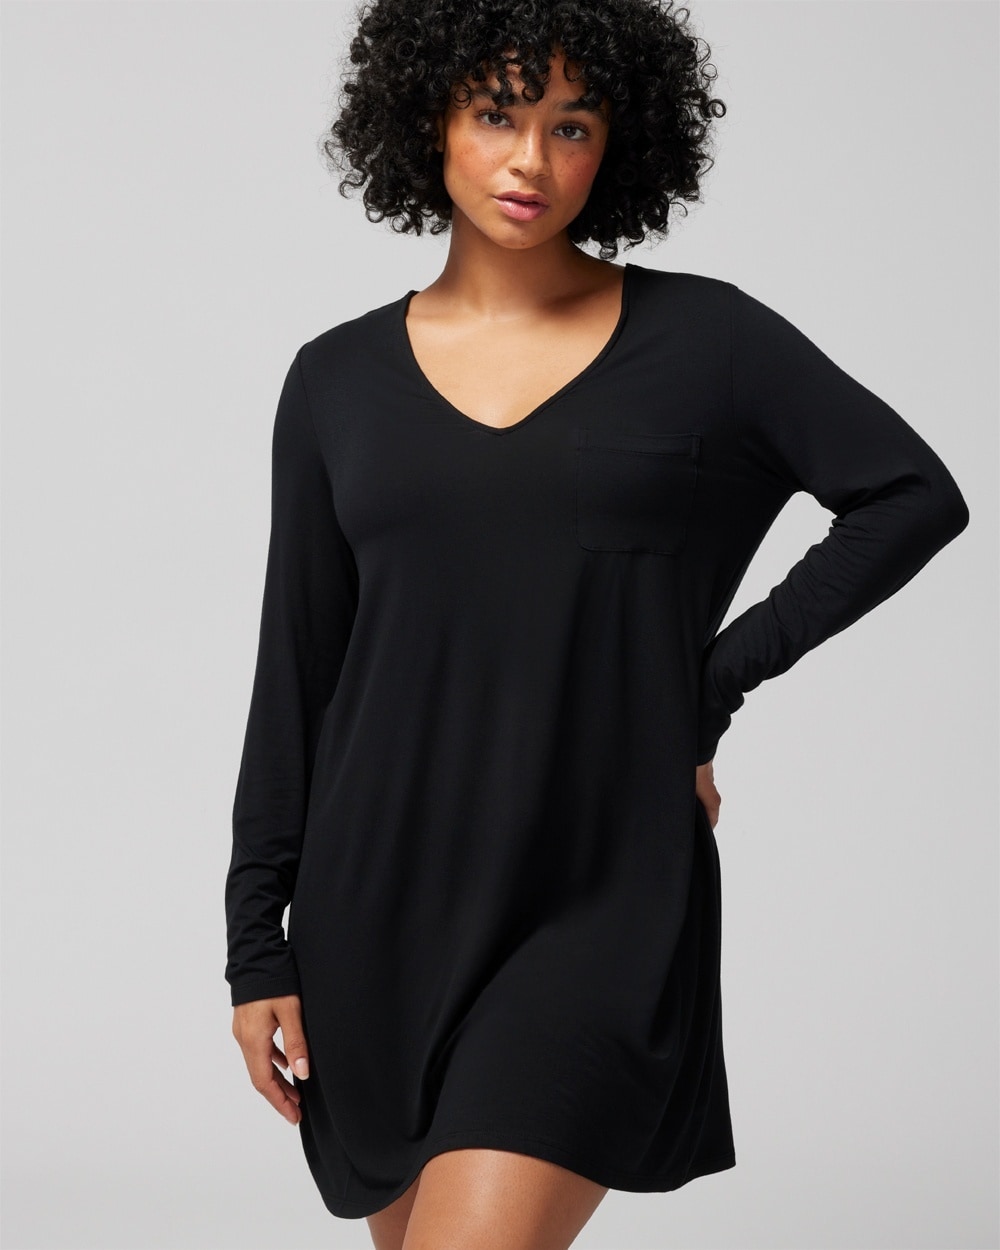 SOMA WOMEN'S COOL NIGHTS LONG-SLEEVE NIGHT GOWN IN BLACK SIZE SMALL | SOMA